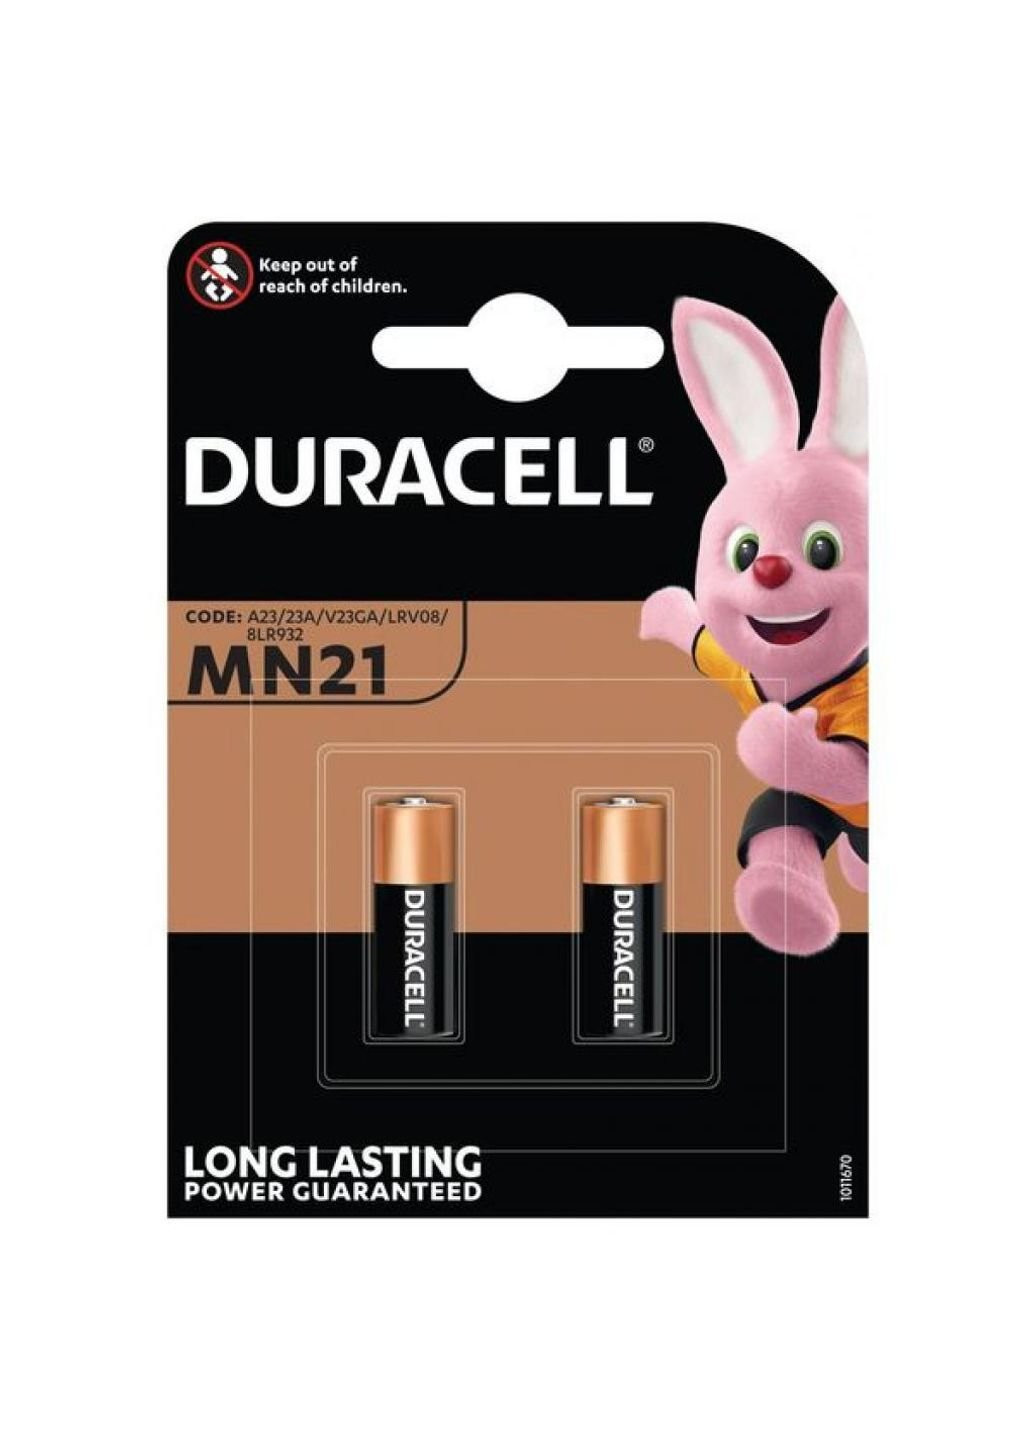 MN21 / A23 12V * 2 Акумулятор (5007812) Duracell (251411804)